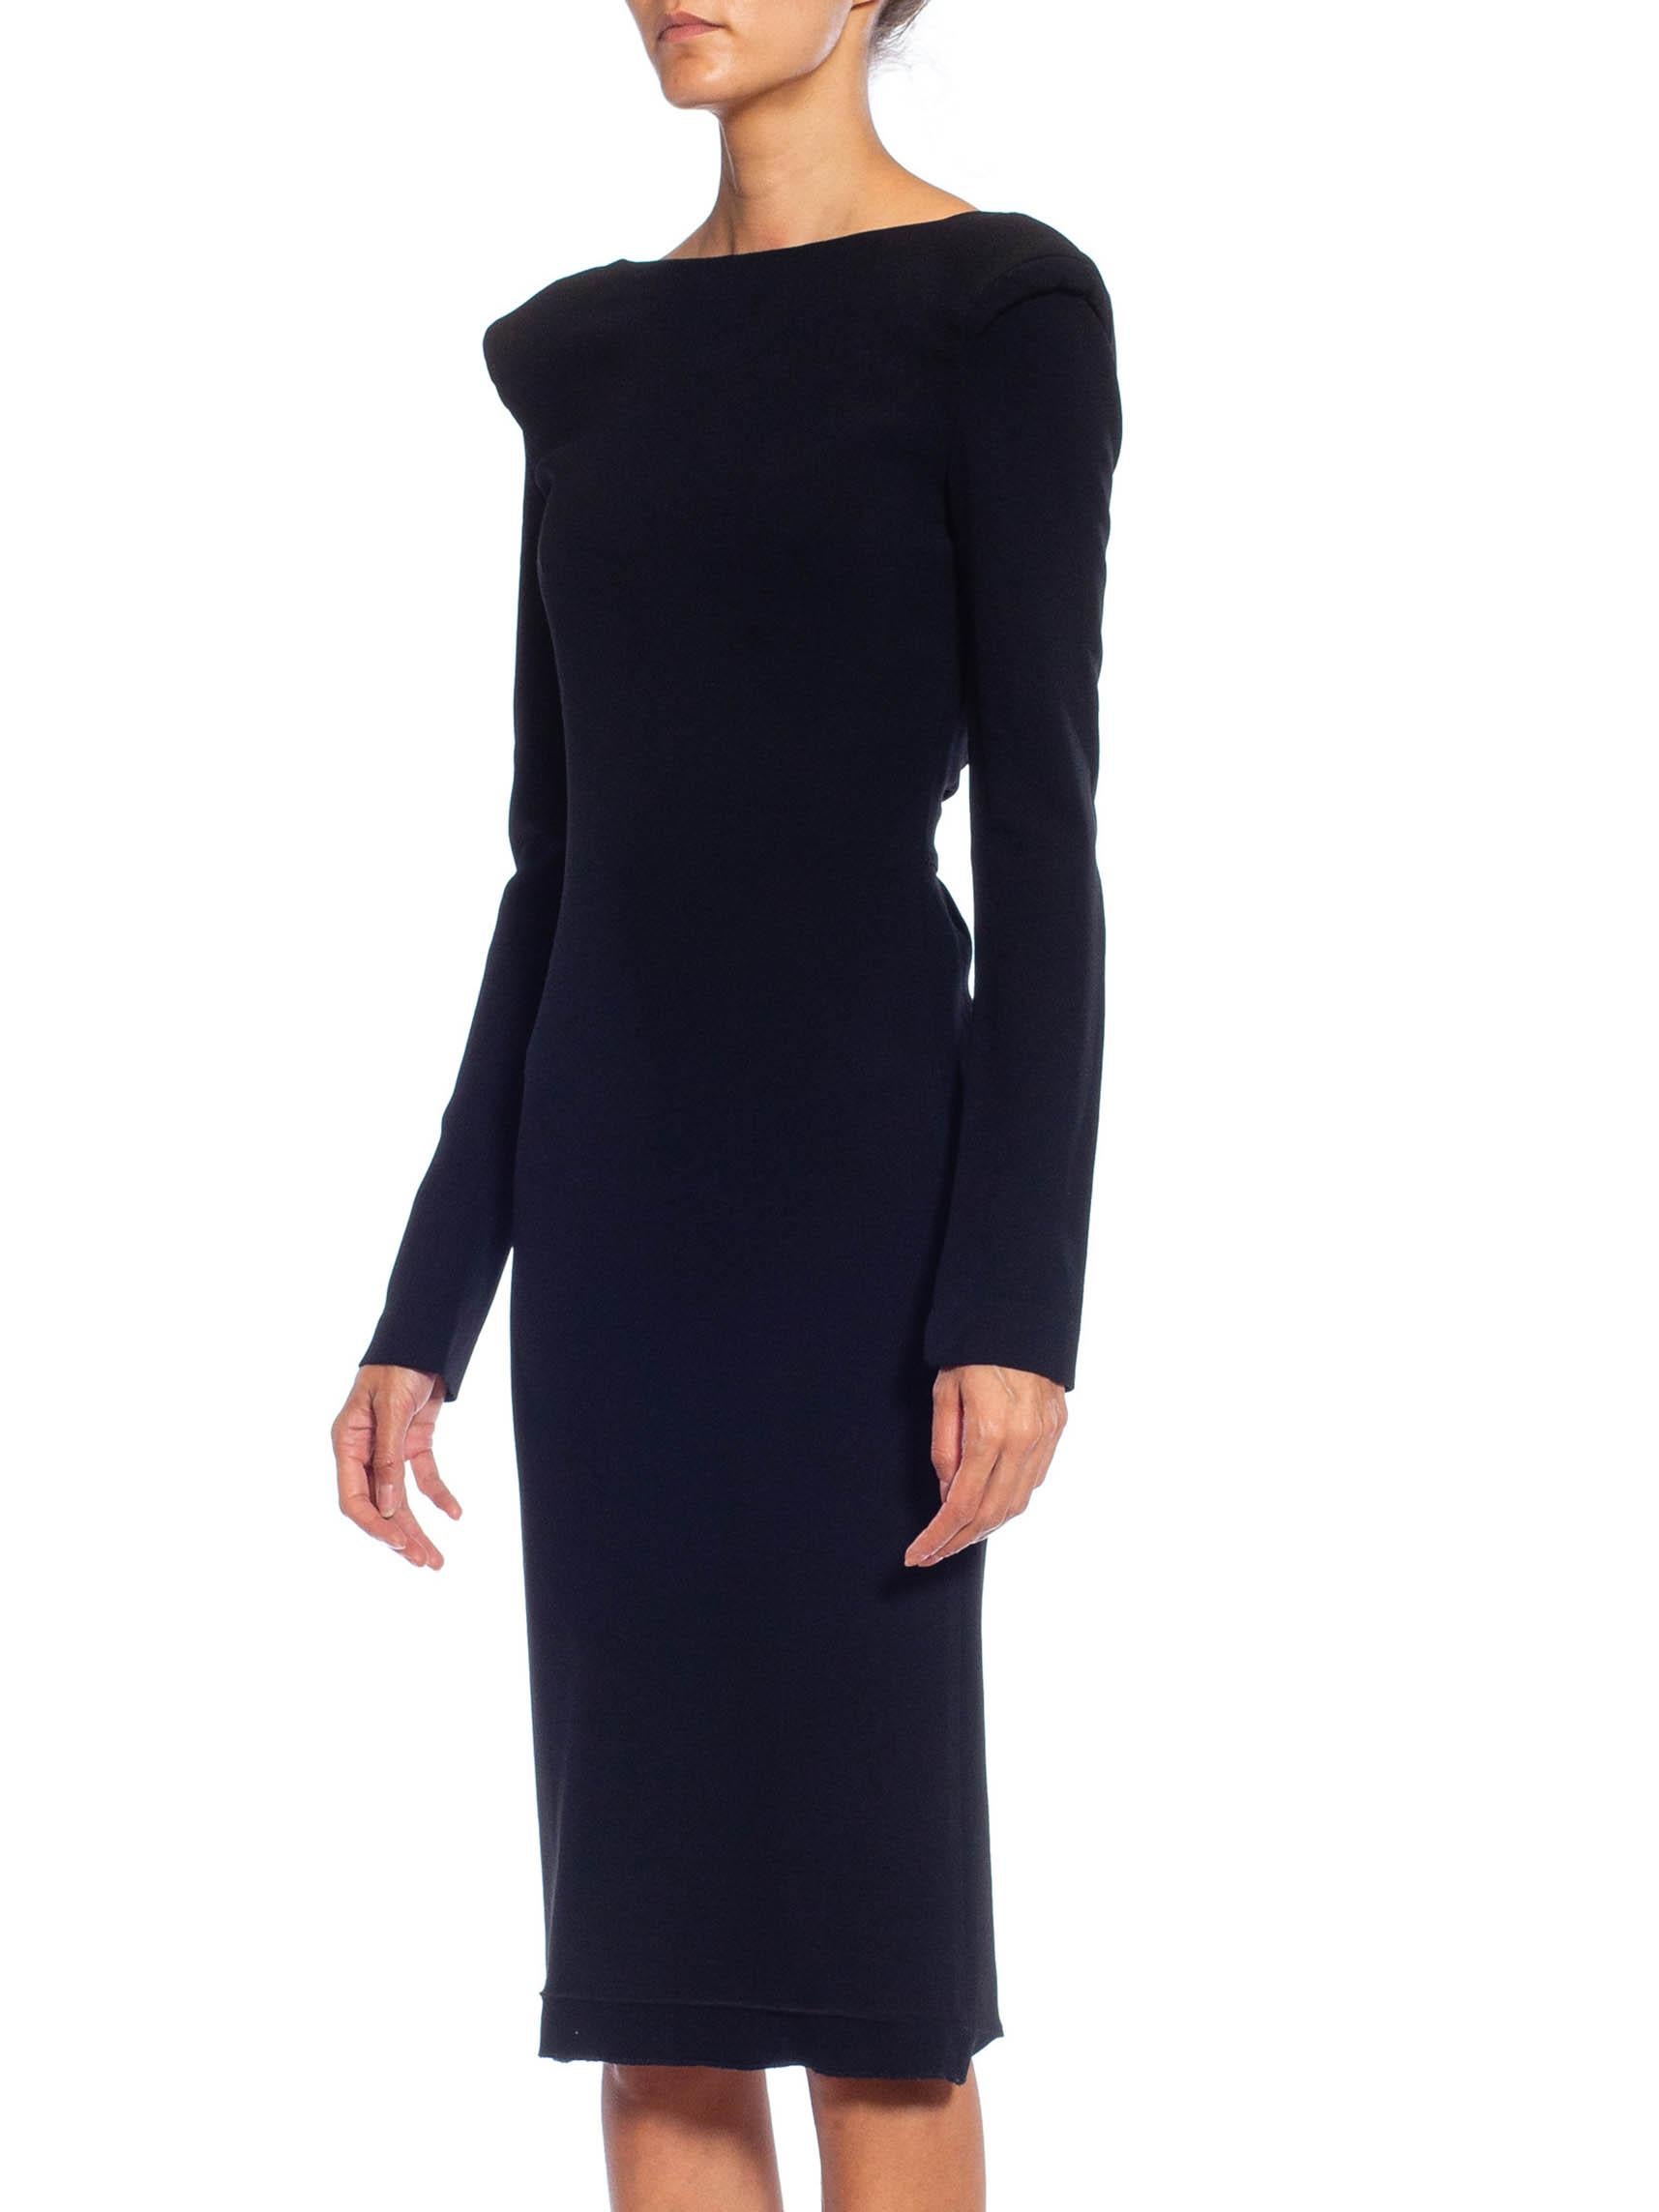 2000S TOM FORD Black Viscose Blend Long Sleeve Backless Dress With Padded Shoul In Excellent Condition For Sale In New York, NY